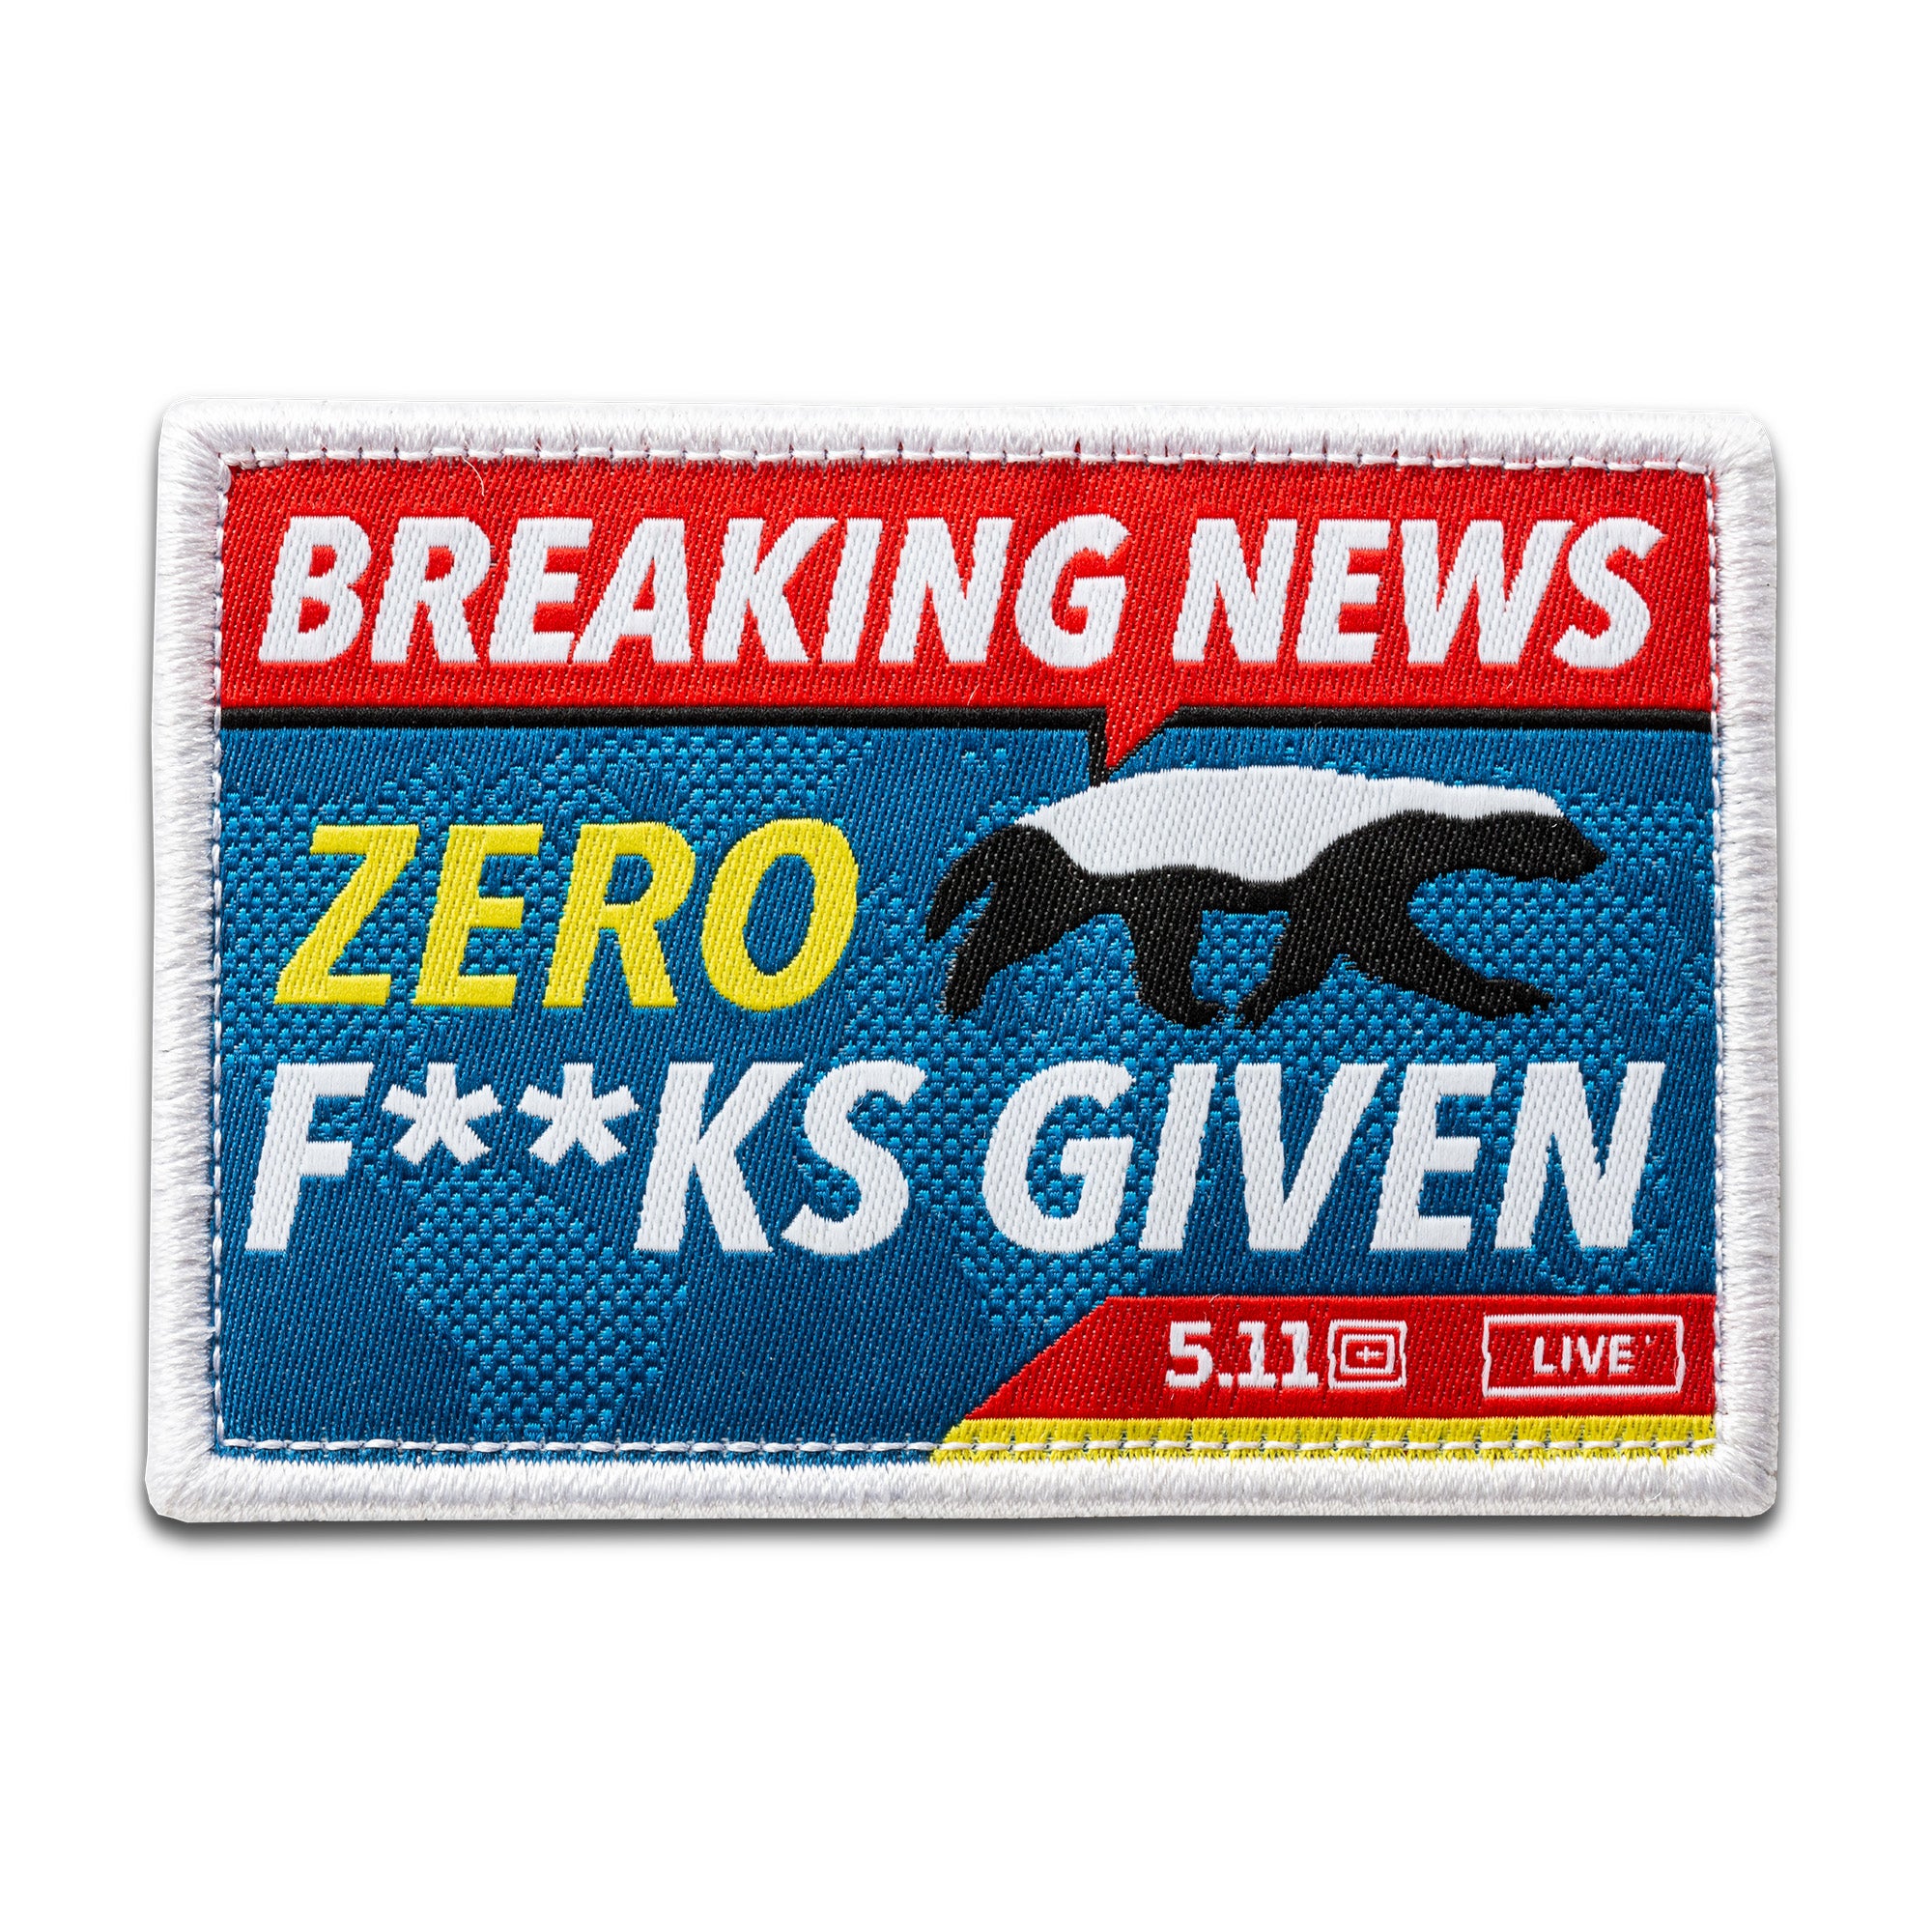 5.11 Tactical Breaking News Patch